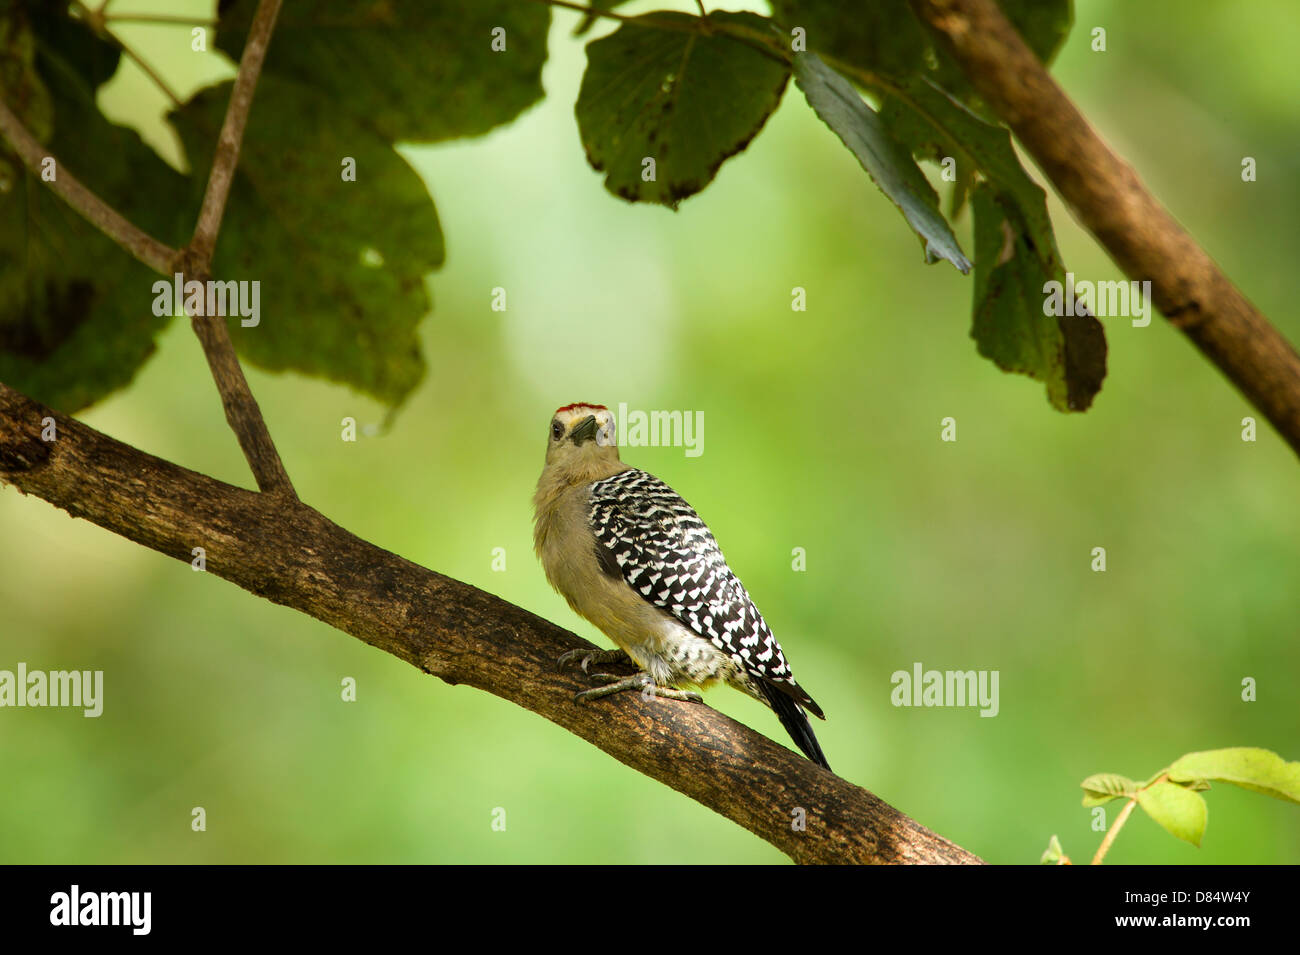 hoffmann's woodpecker perched on a branch in Costa Rica, Central America Stock Photo